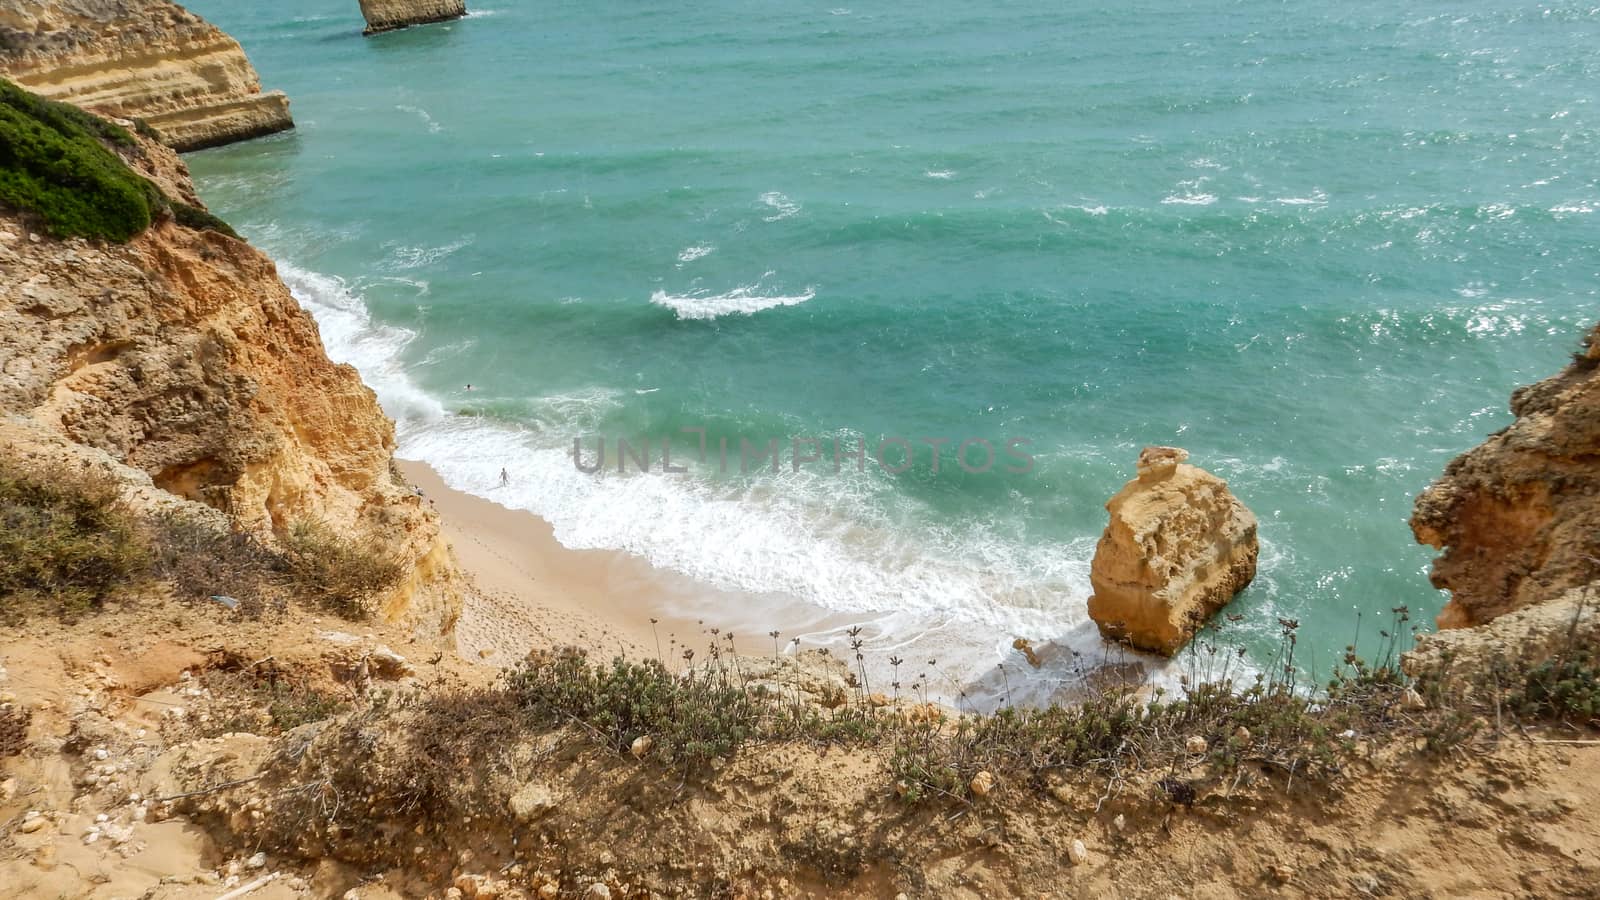 Panoramic view of the ocean cliffs of the Algarve, Portugal, with orange rocks on the blue sea